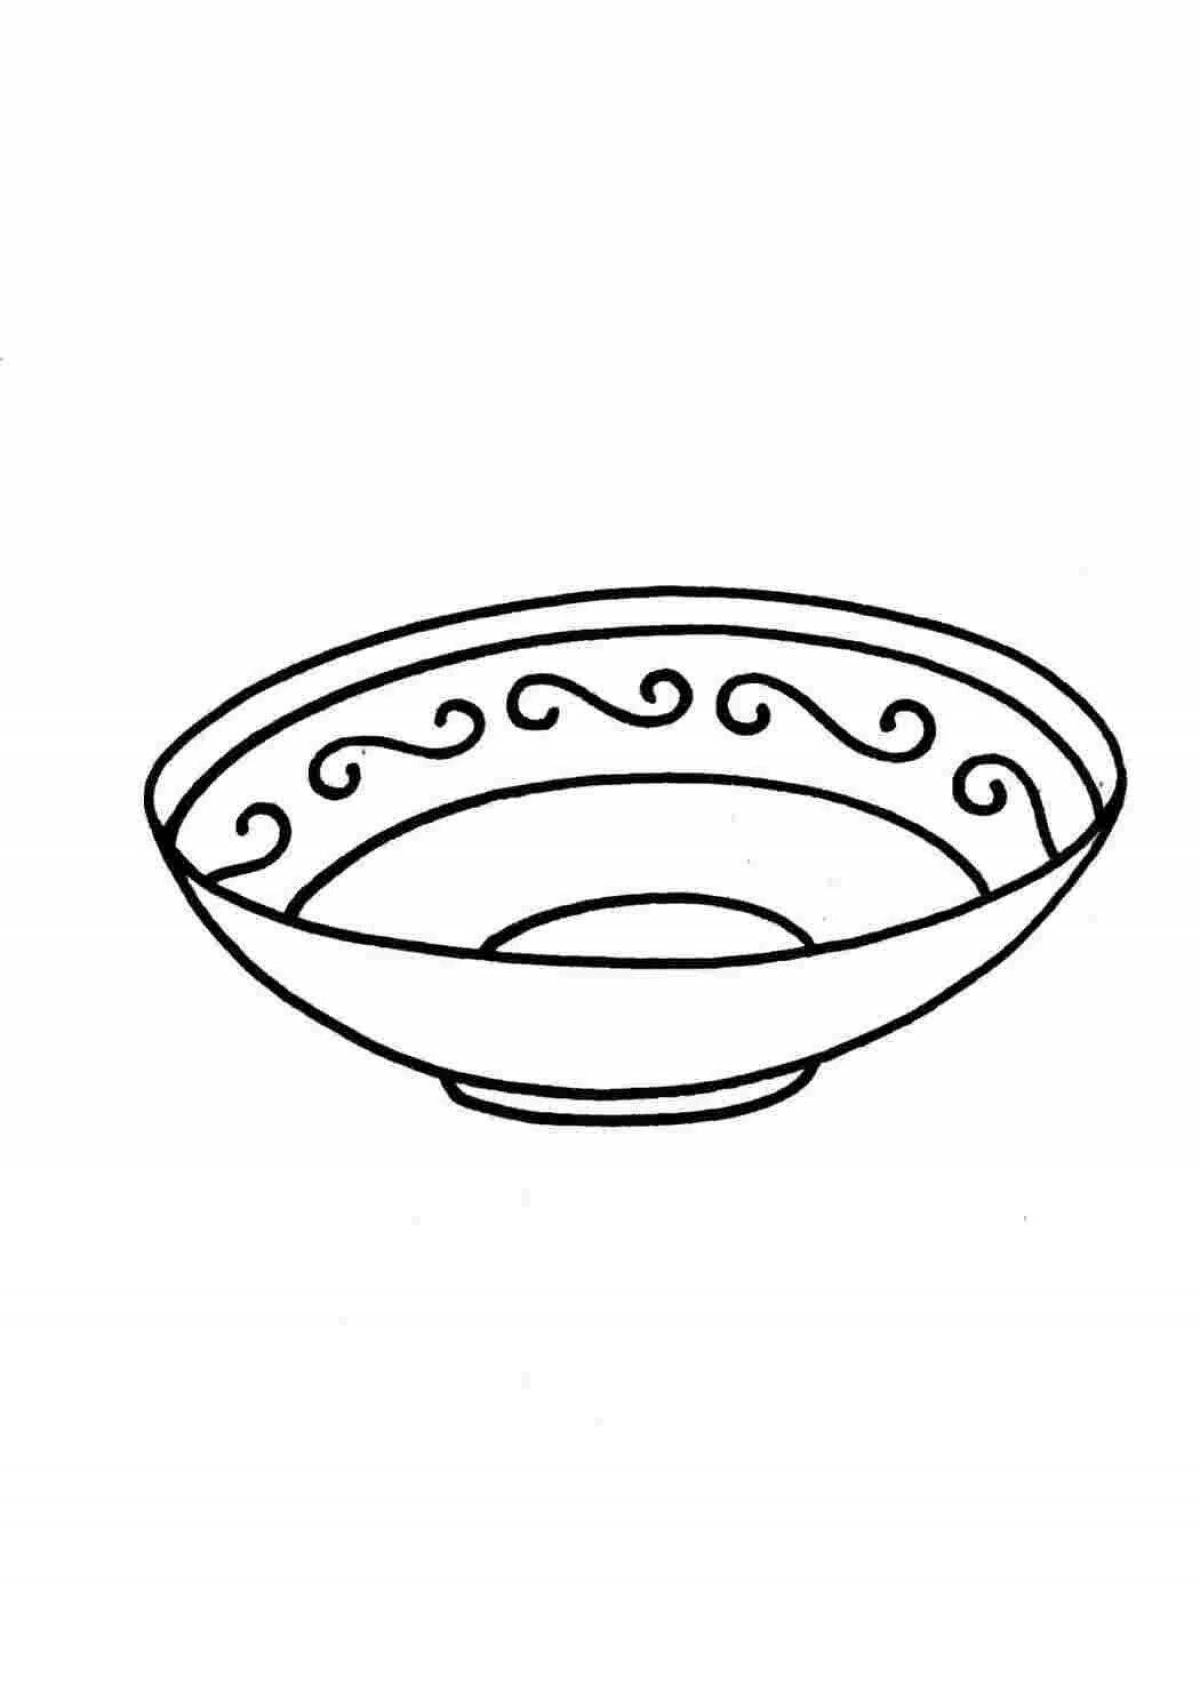 Great coloring saucer for babies